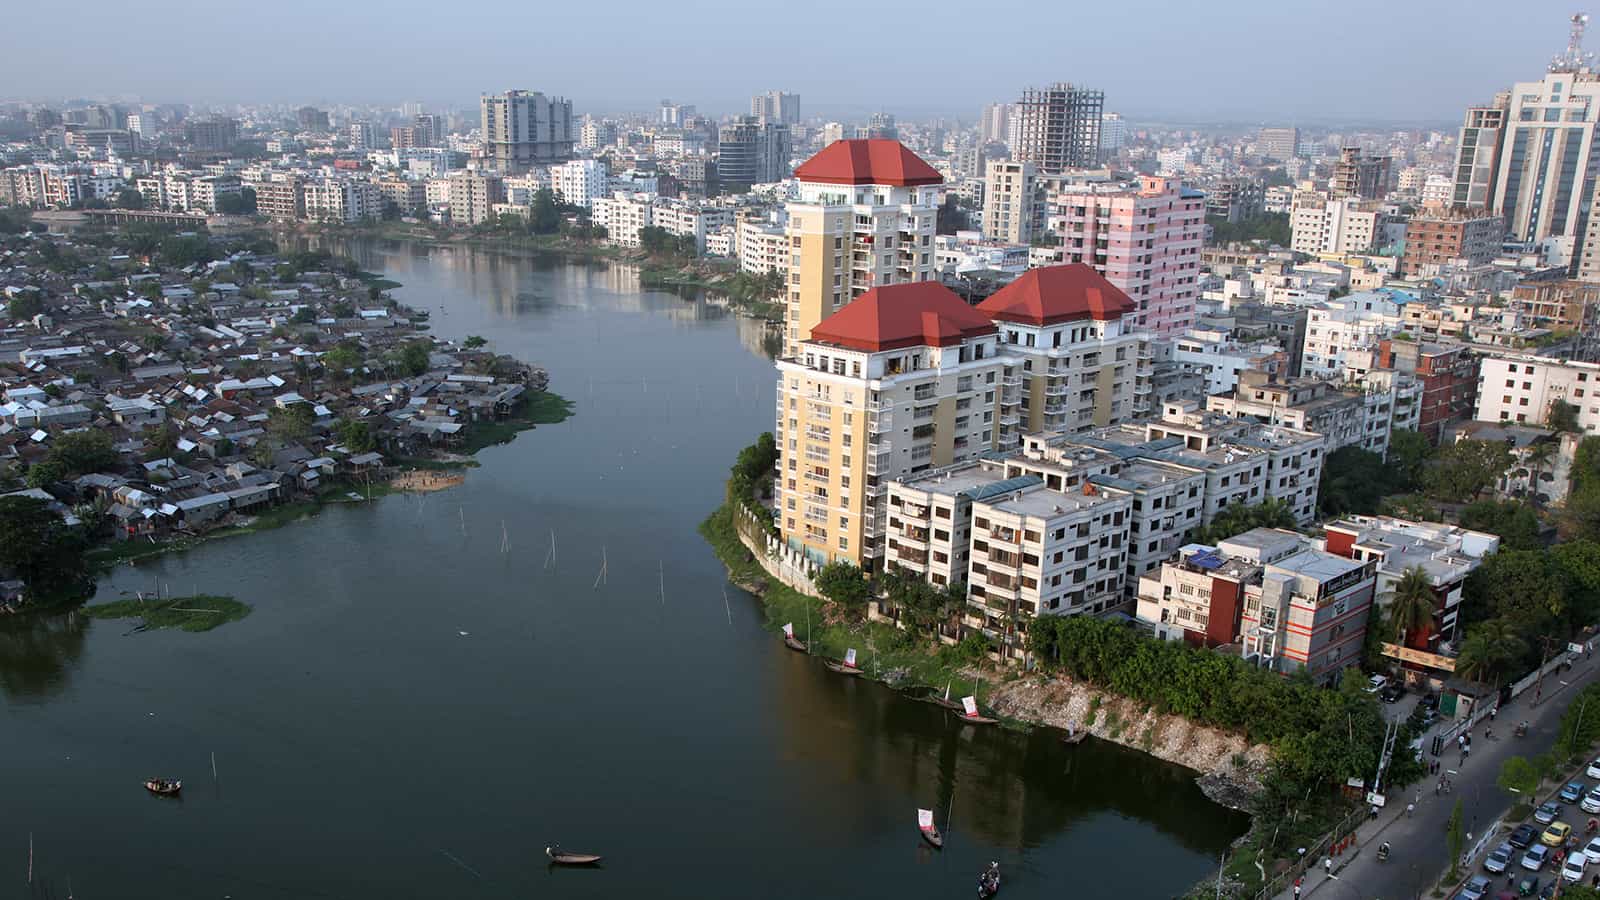 Bangladesh – the Story of an Emerging Startup Hub in Asia